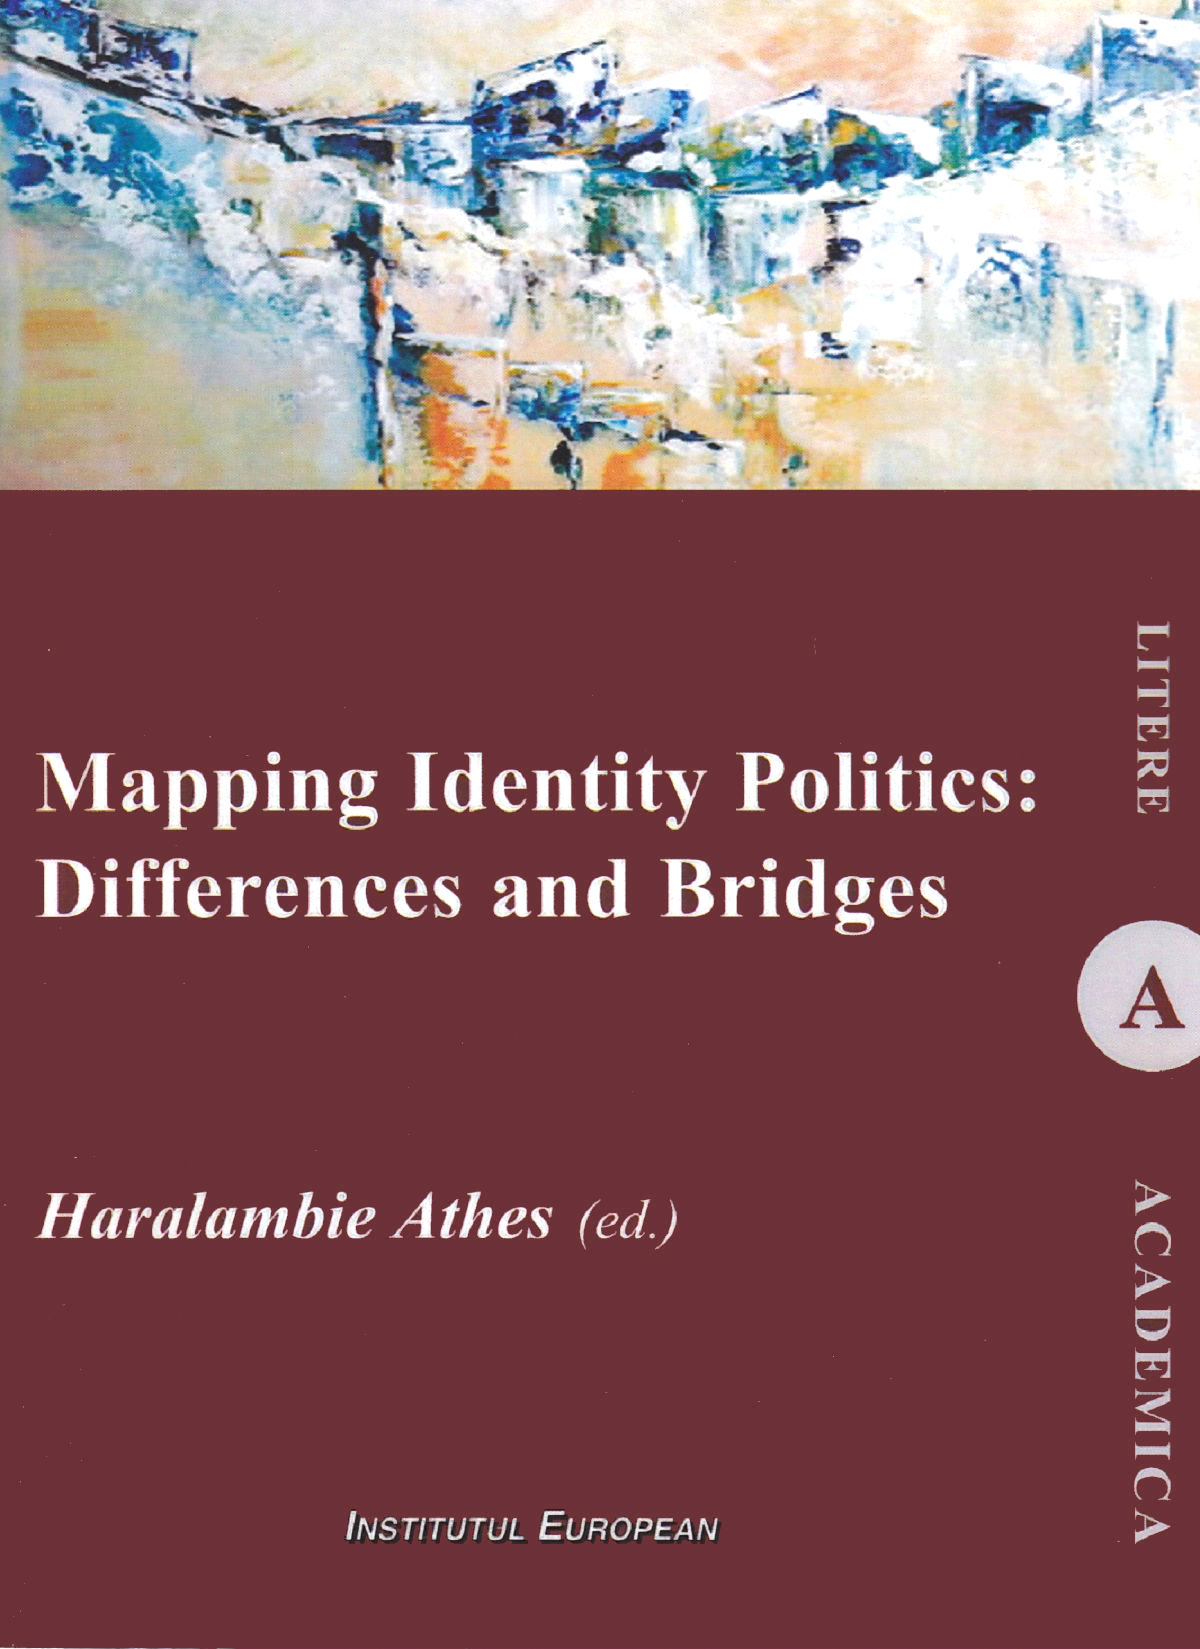 Mapping Identity Politics: Differences and Bridges - Haralambie Athes